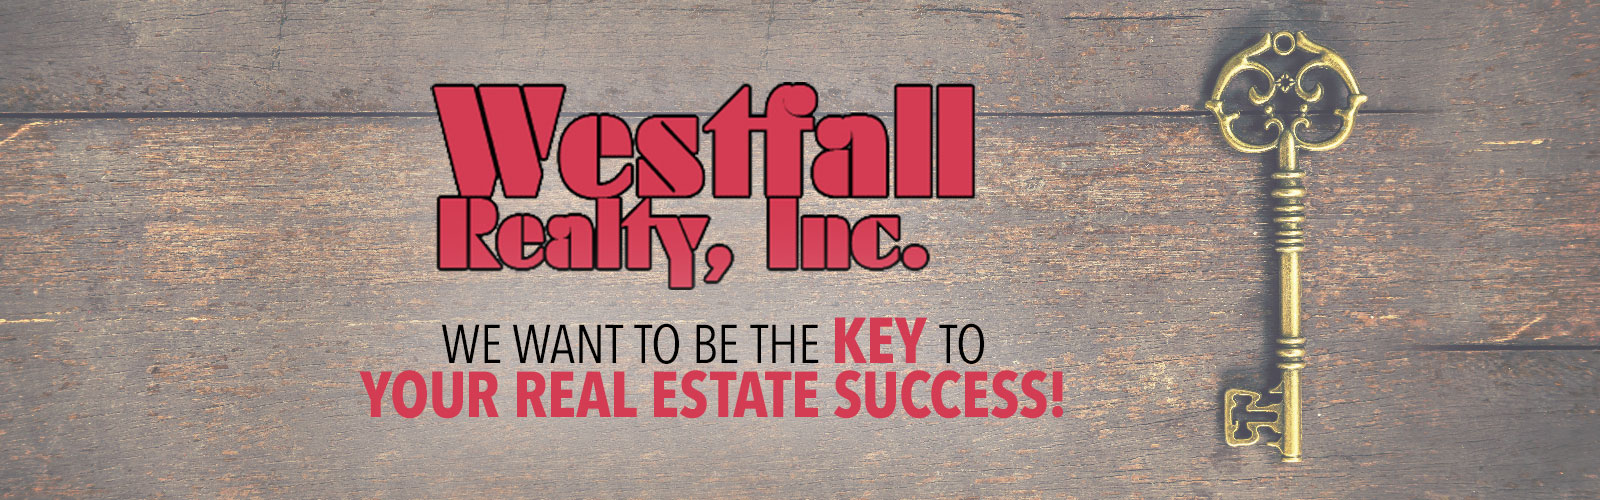 westfall realty logo We want to be the key to your real estate success!